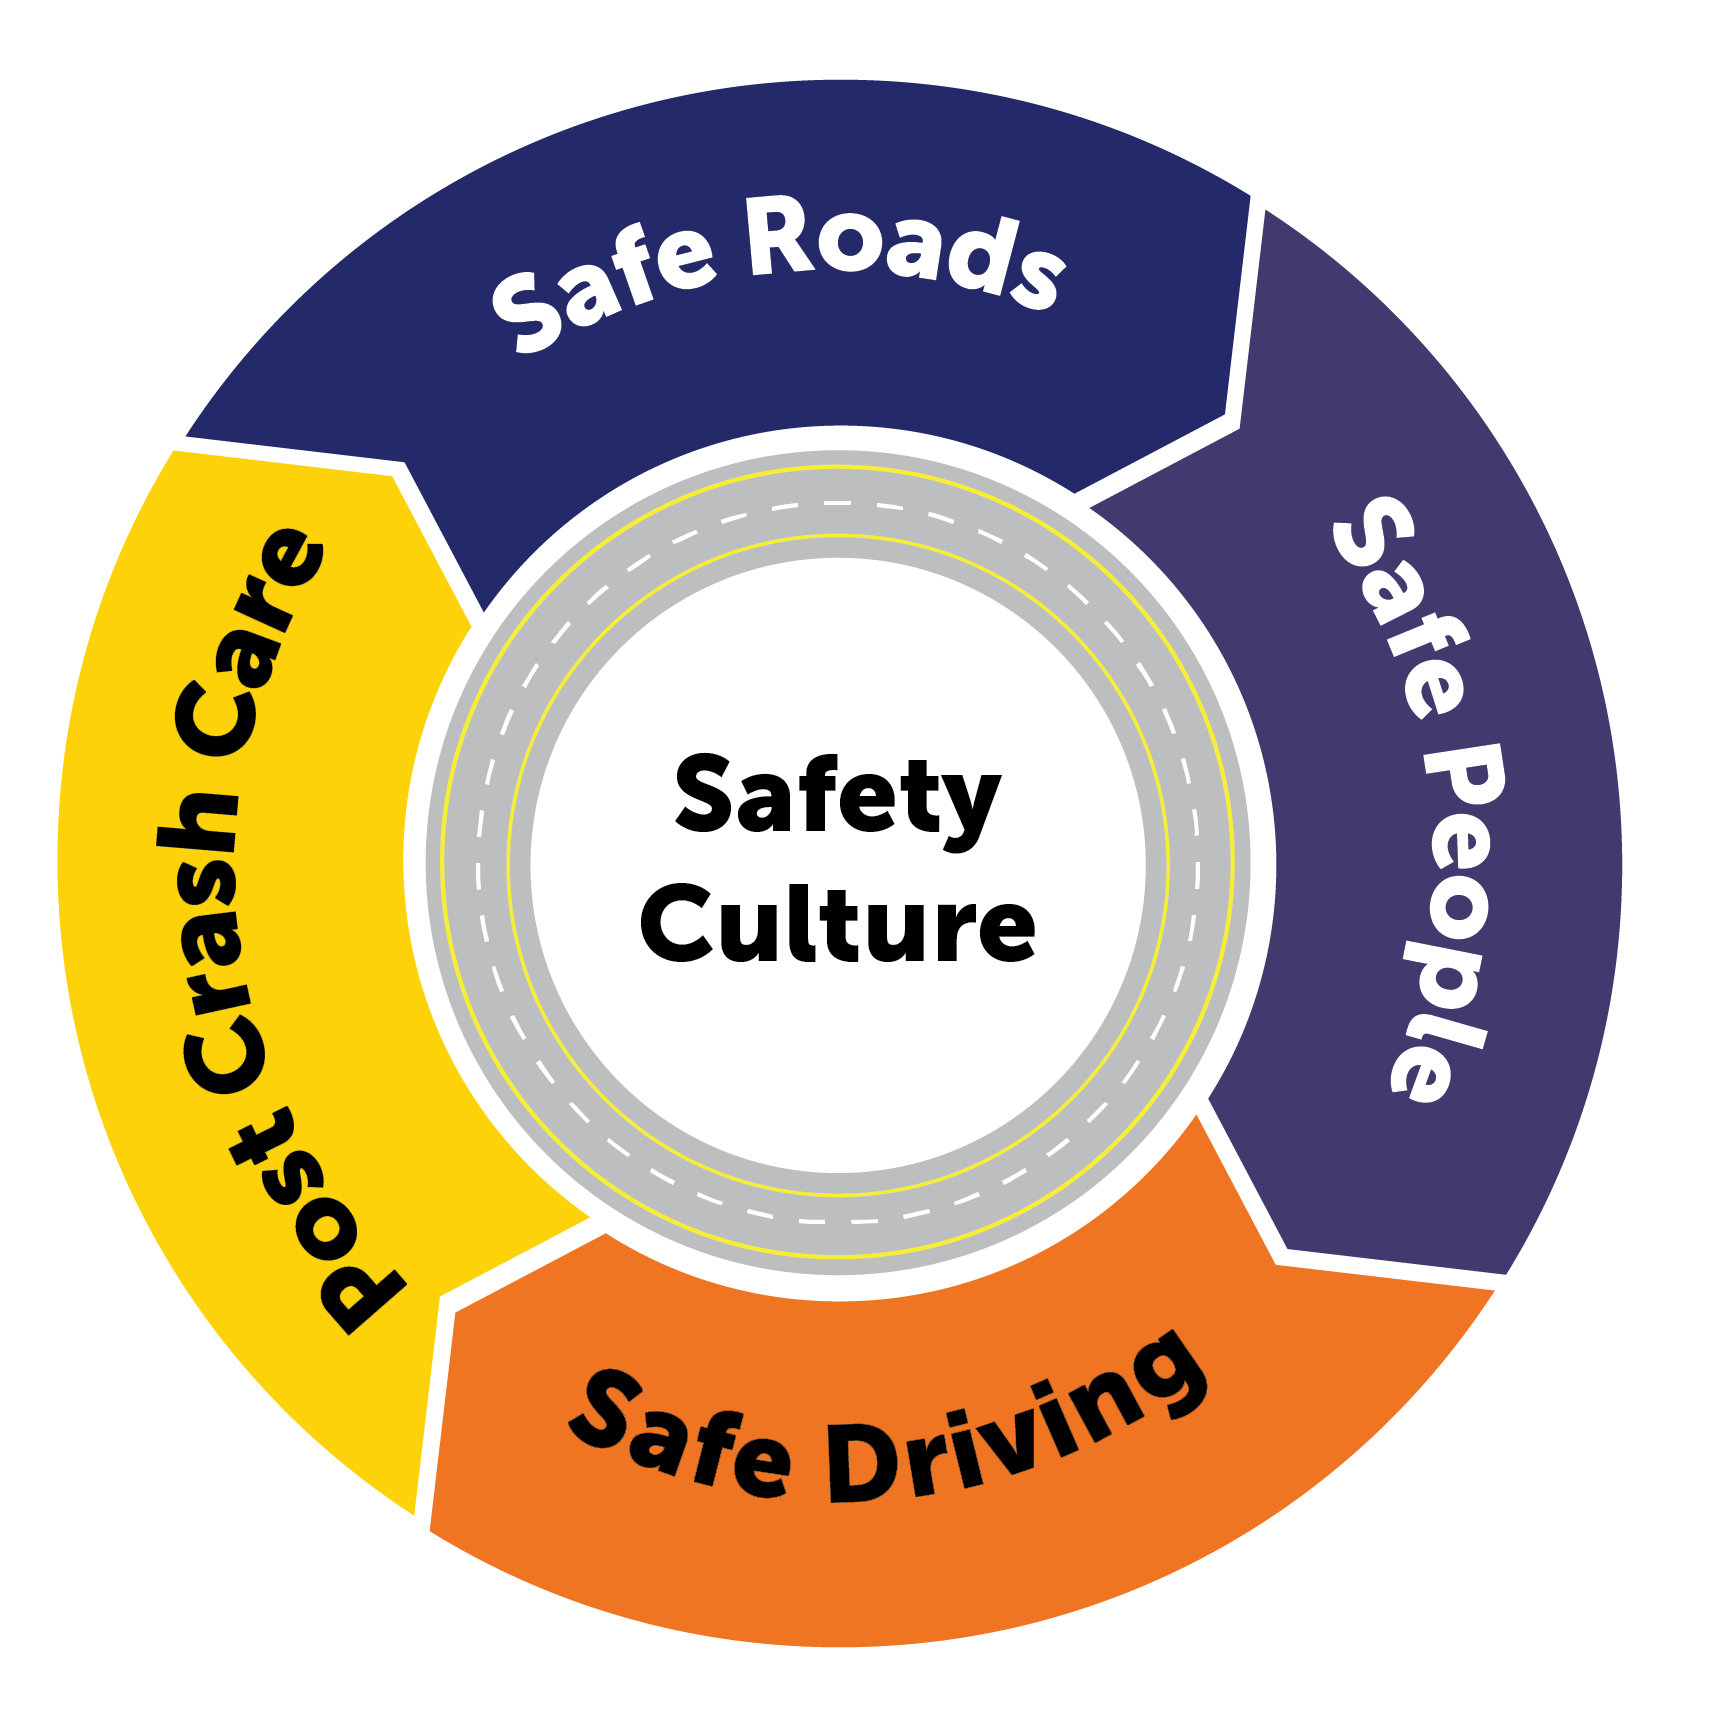 A round diagram with four sections around the exterior, labeled with the text Safe Roads, Safe People, Safe Driving and Post-Crash Care, respectively. The center of the wheel contains the text Safety Culture. 